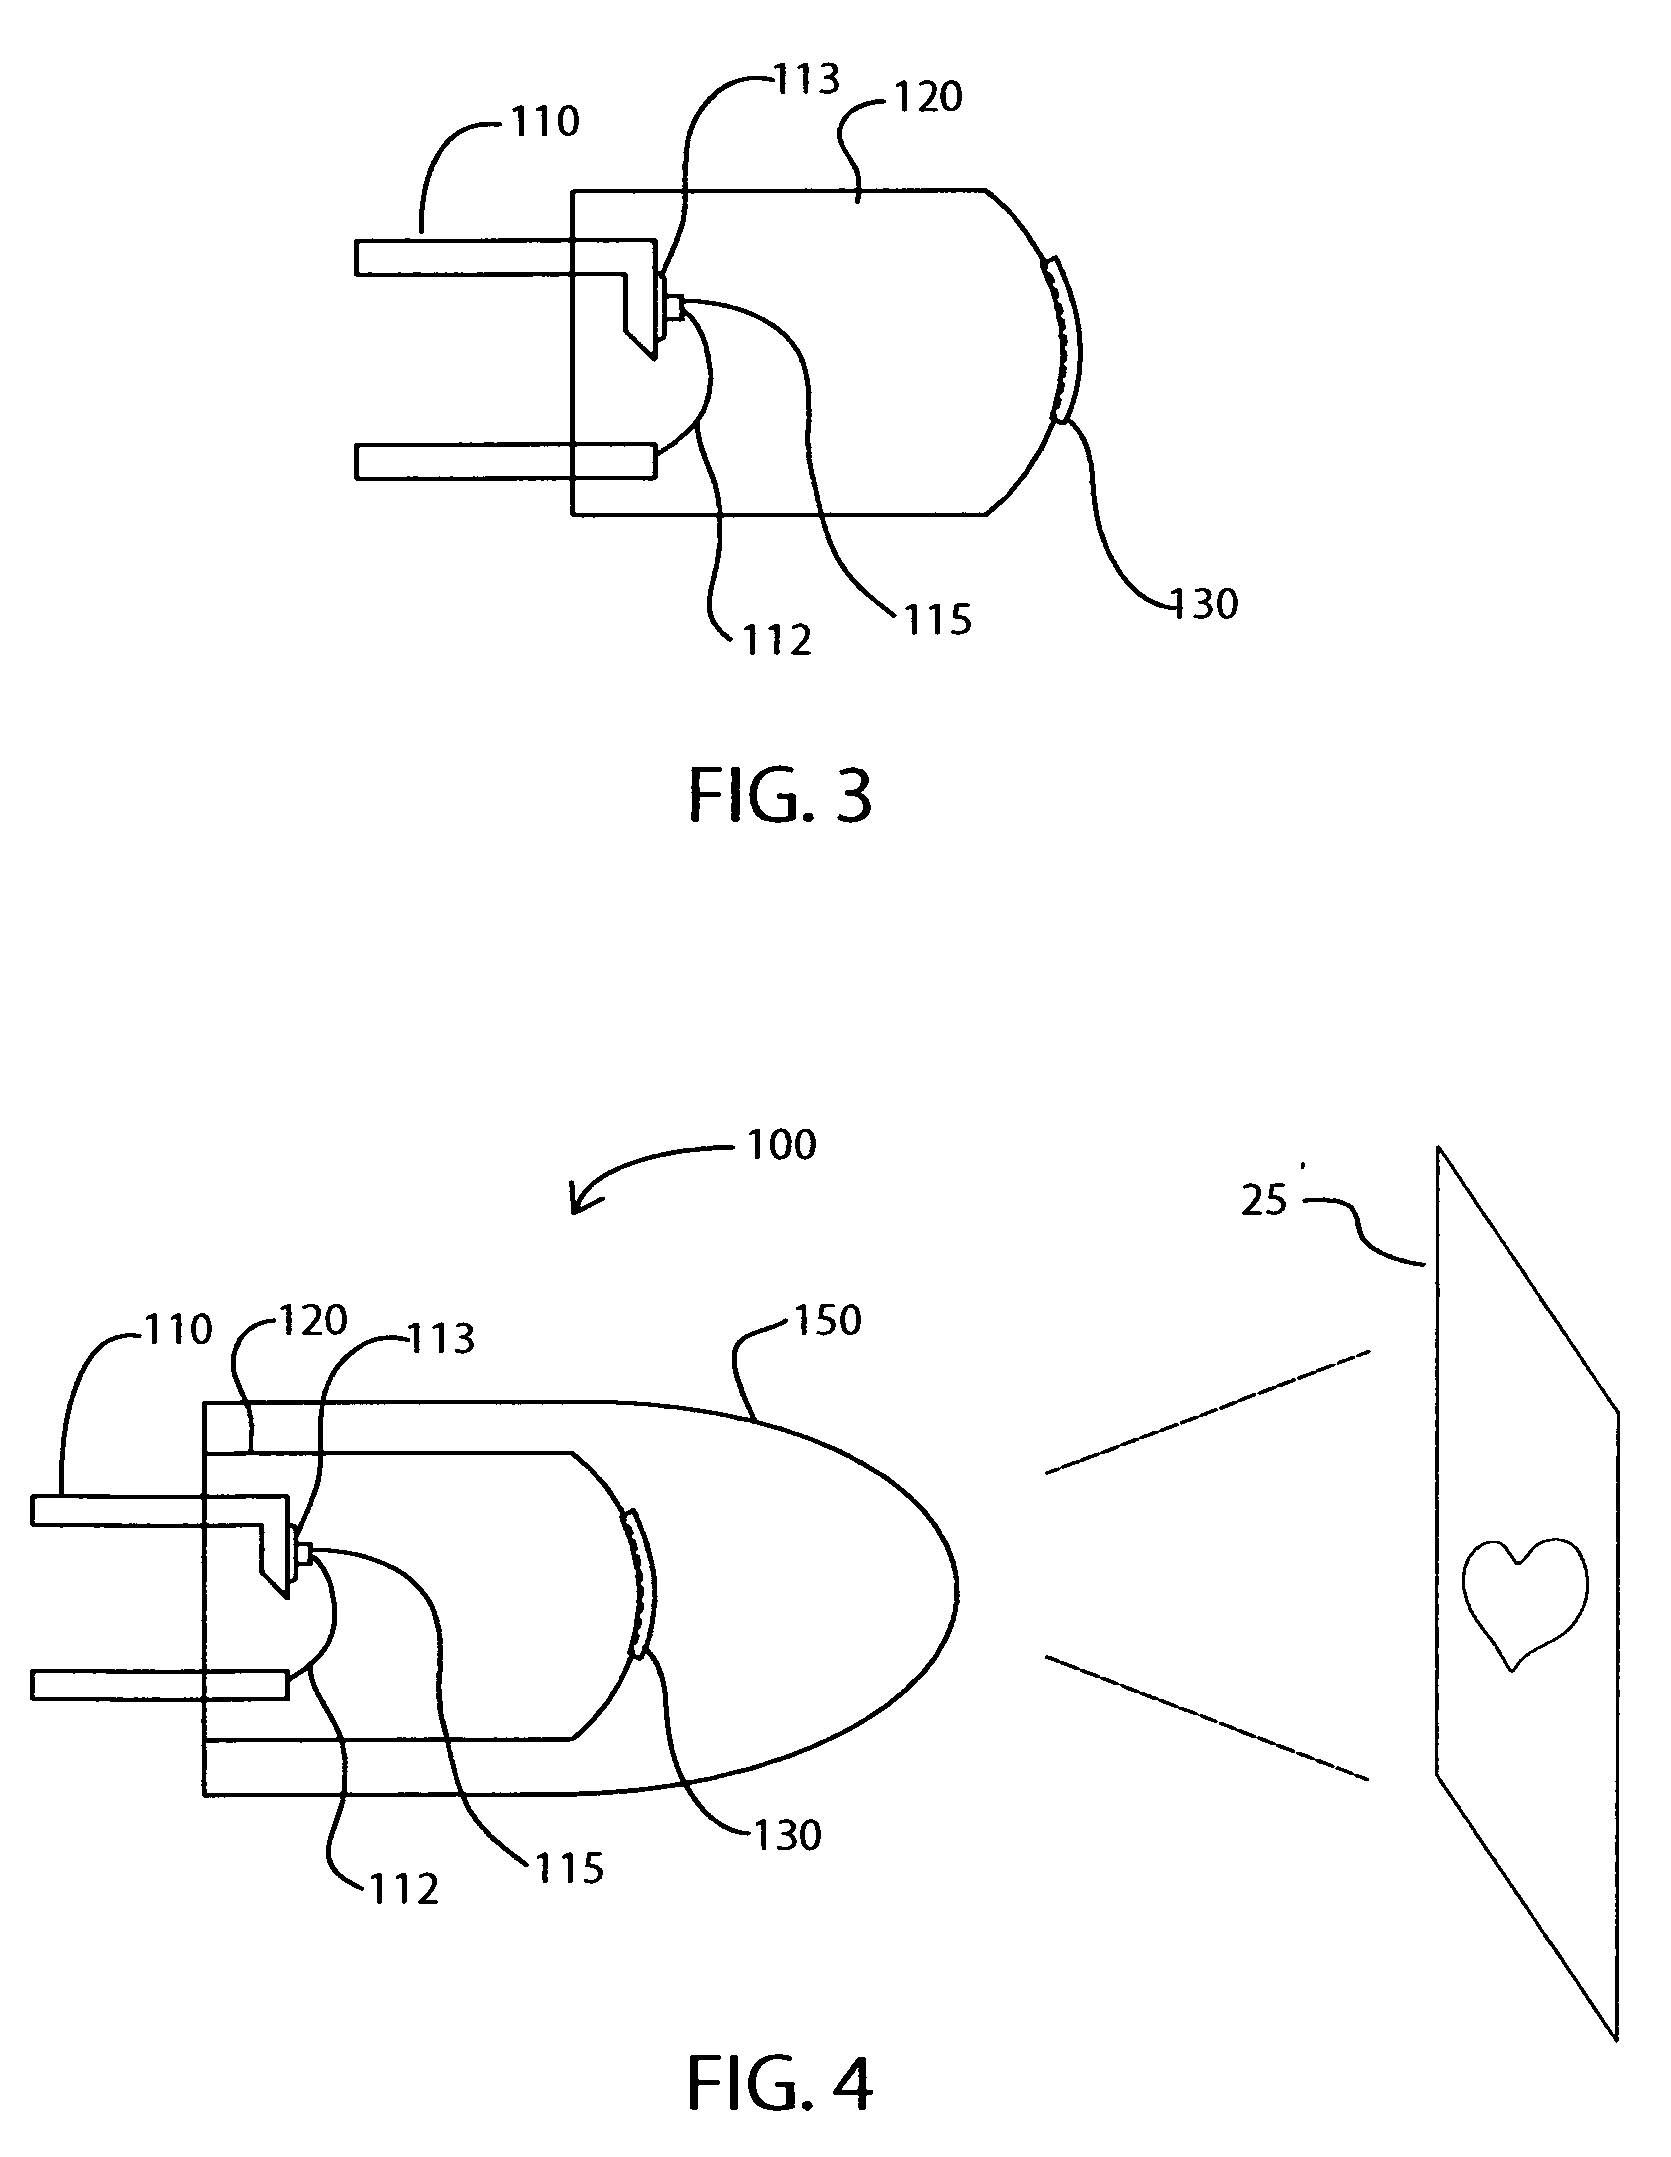 LED image projection apparatus